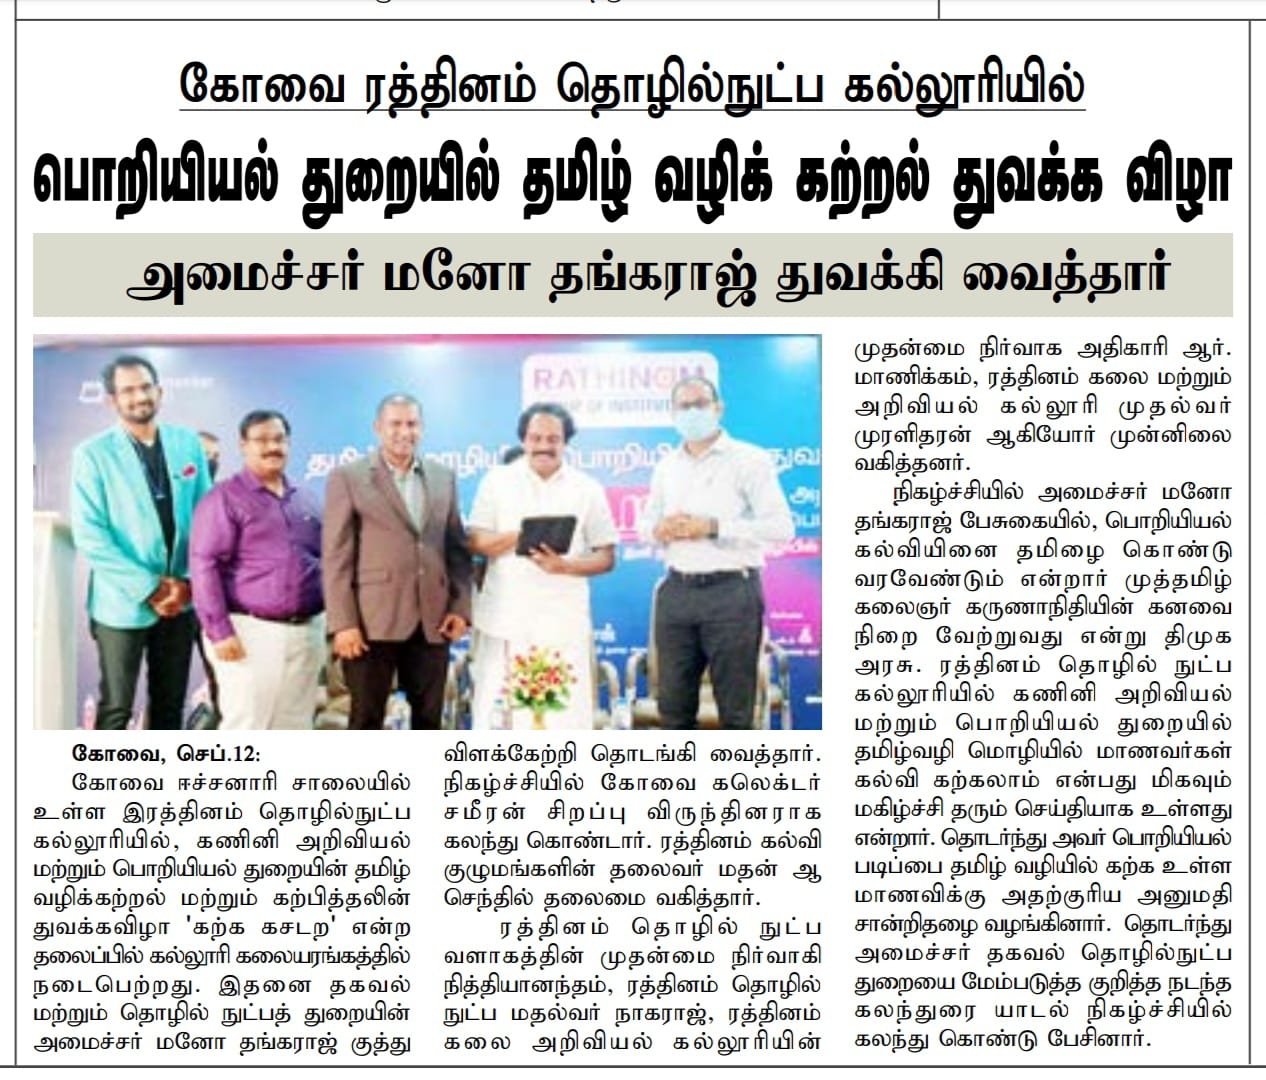 Rathinam In the News!!!